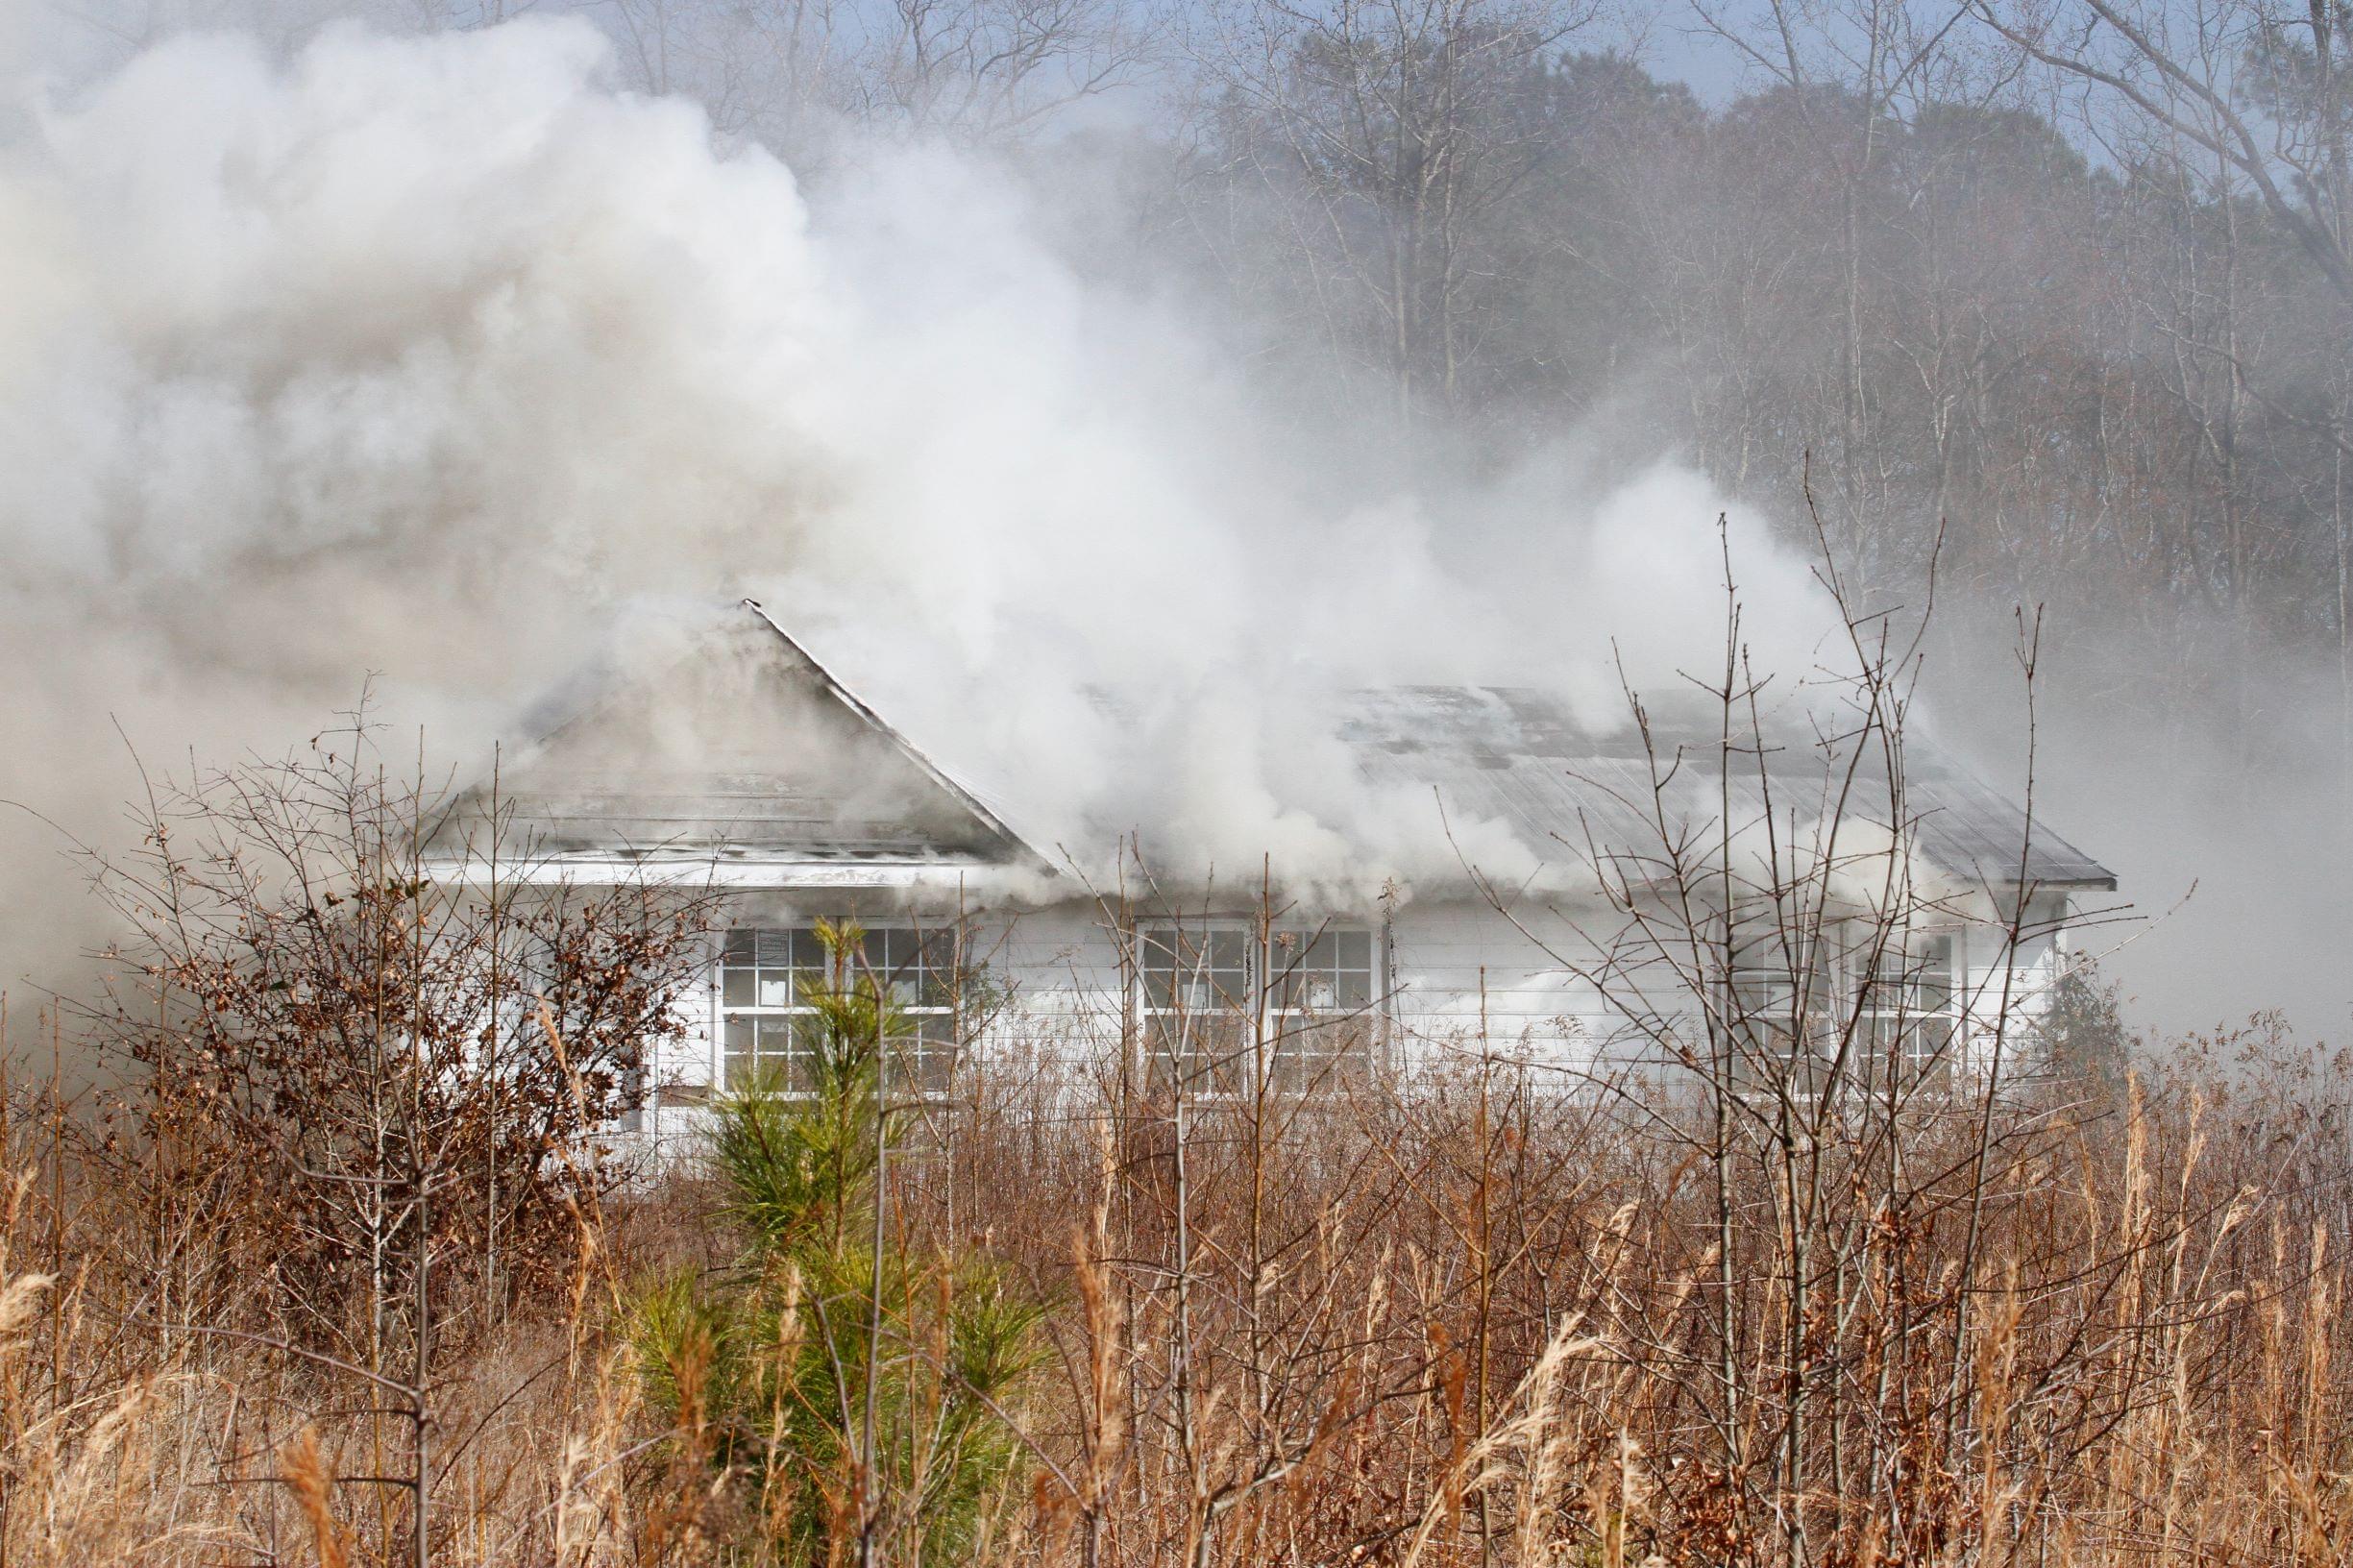 Grass Fire Spreads To Nearby Structure (PHOTO GALLERY)